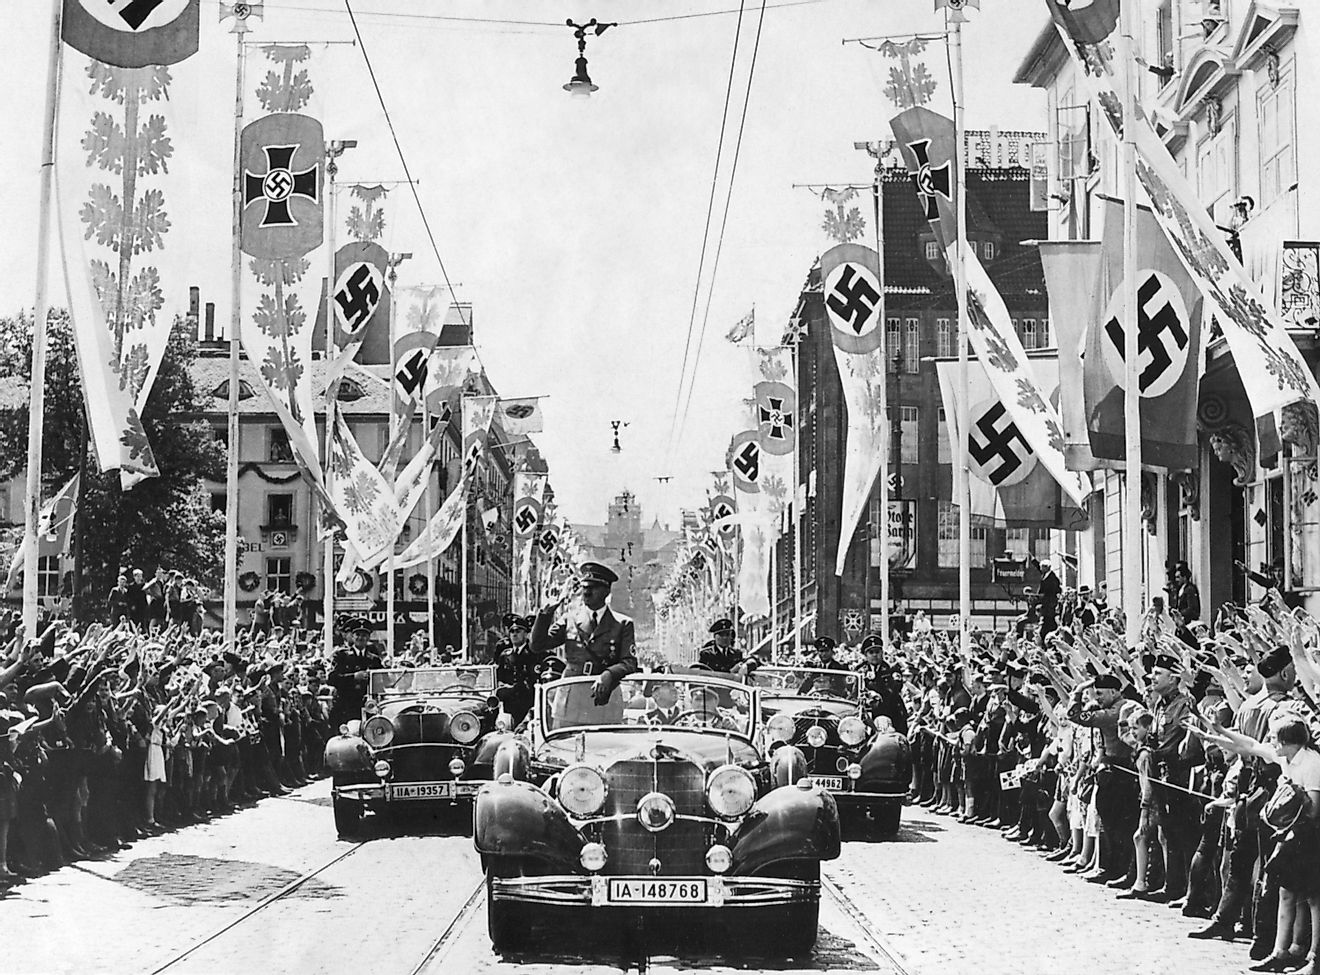 Adolf Hitler waving to crowds from his car at the head of a parade. The streets are decorated with various swastika banners.